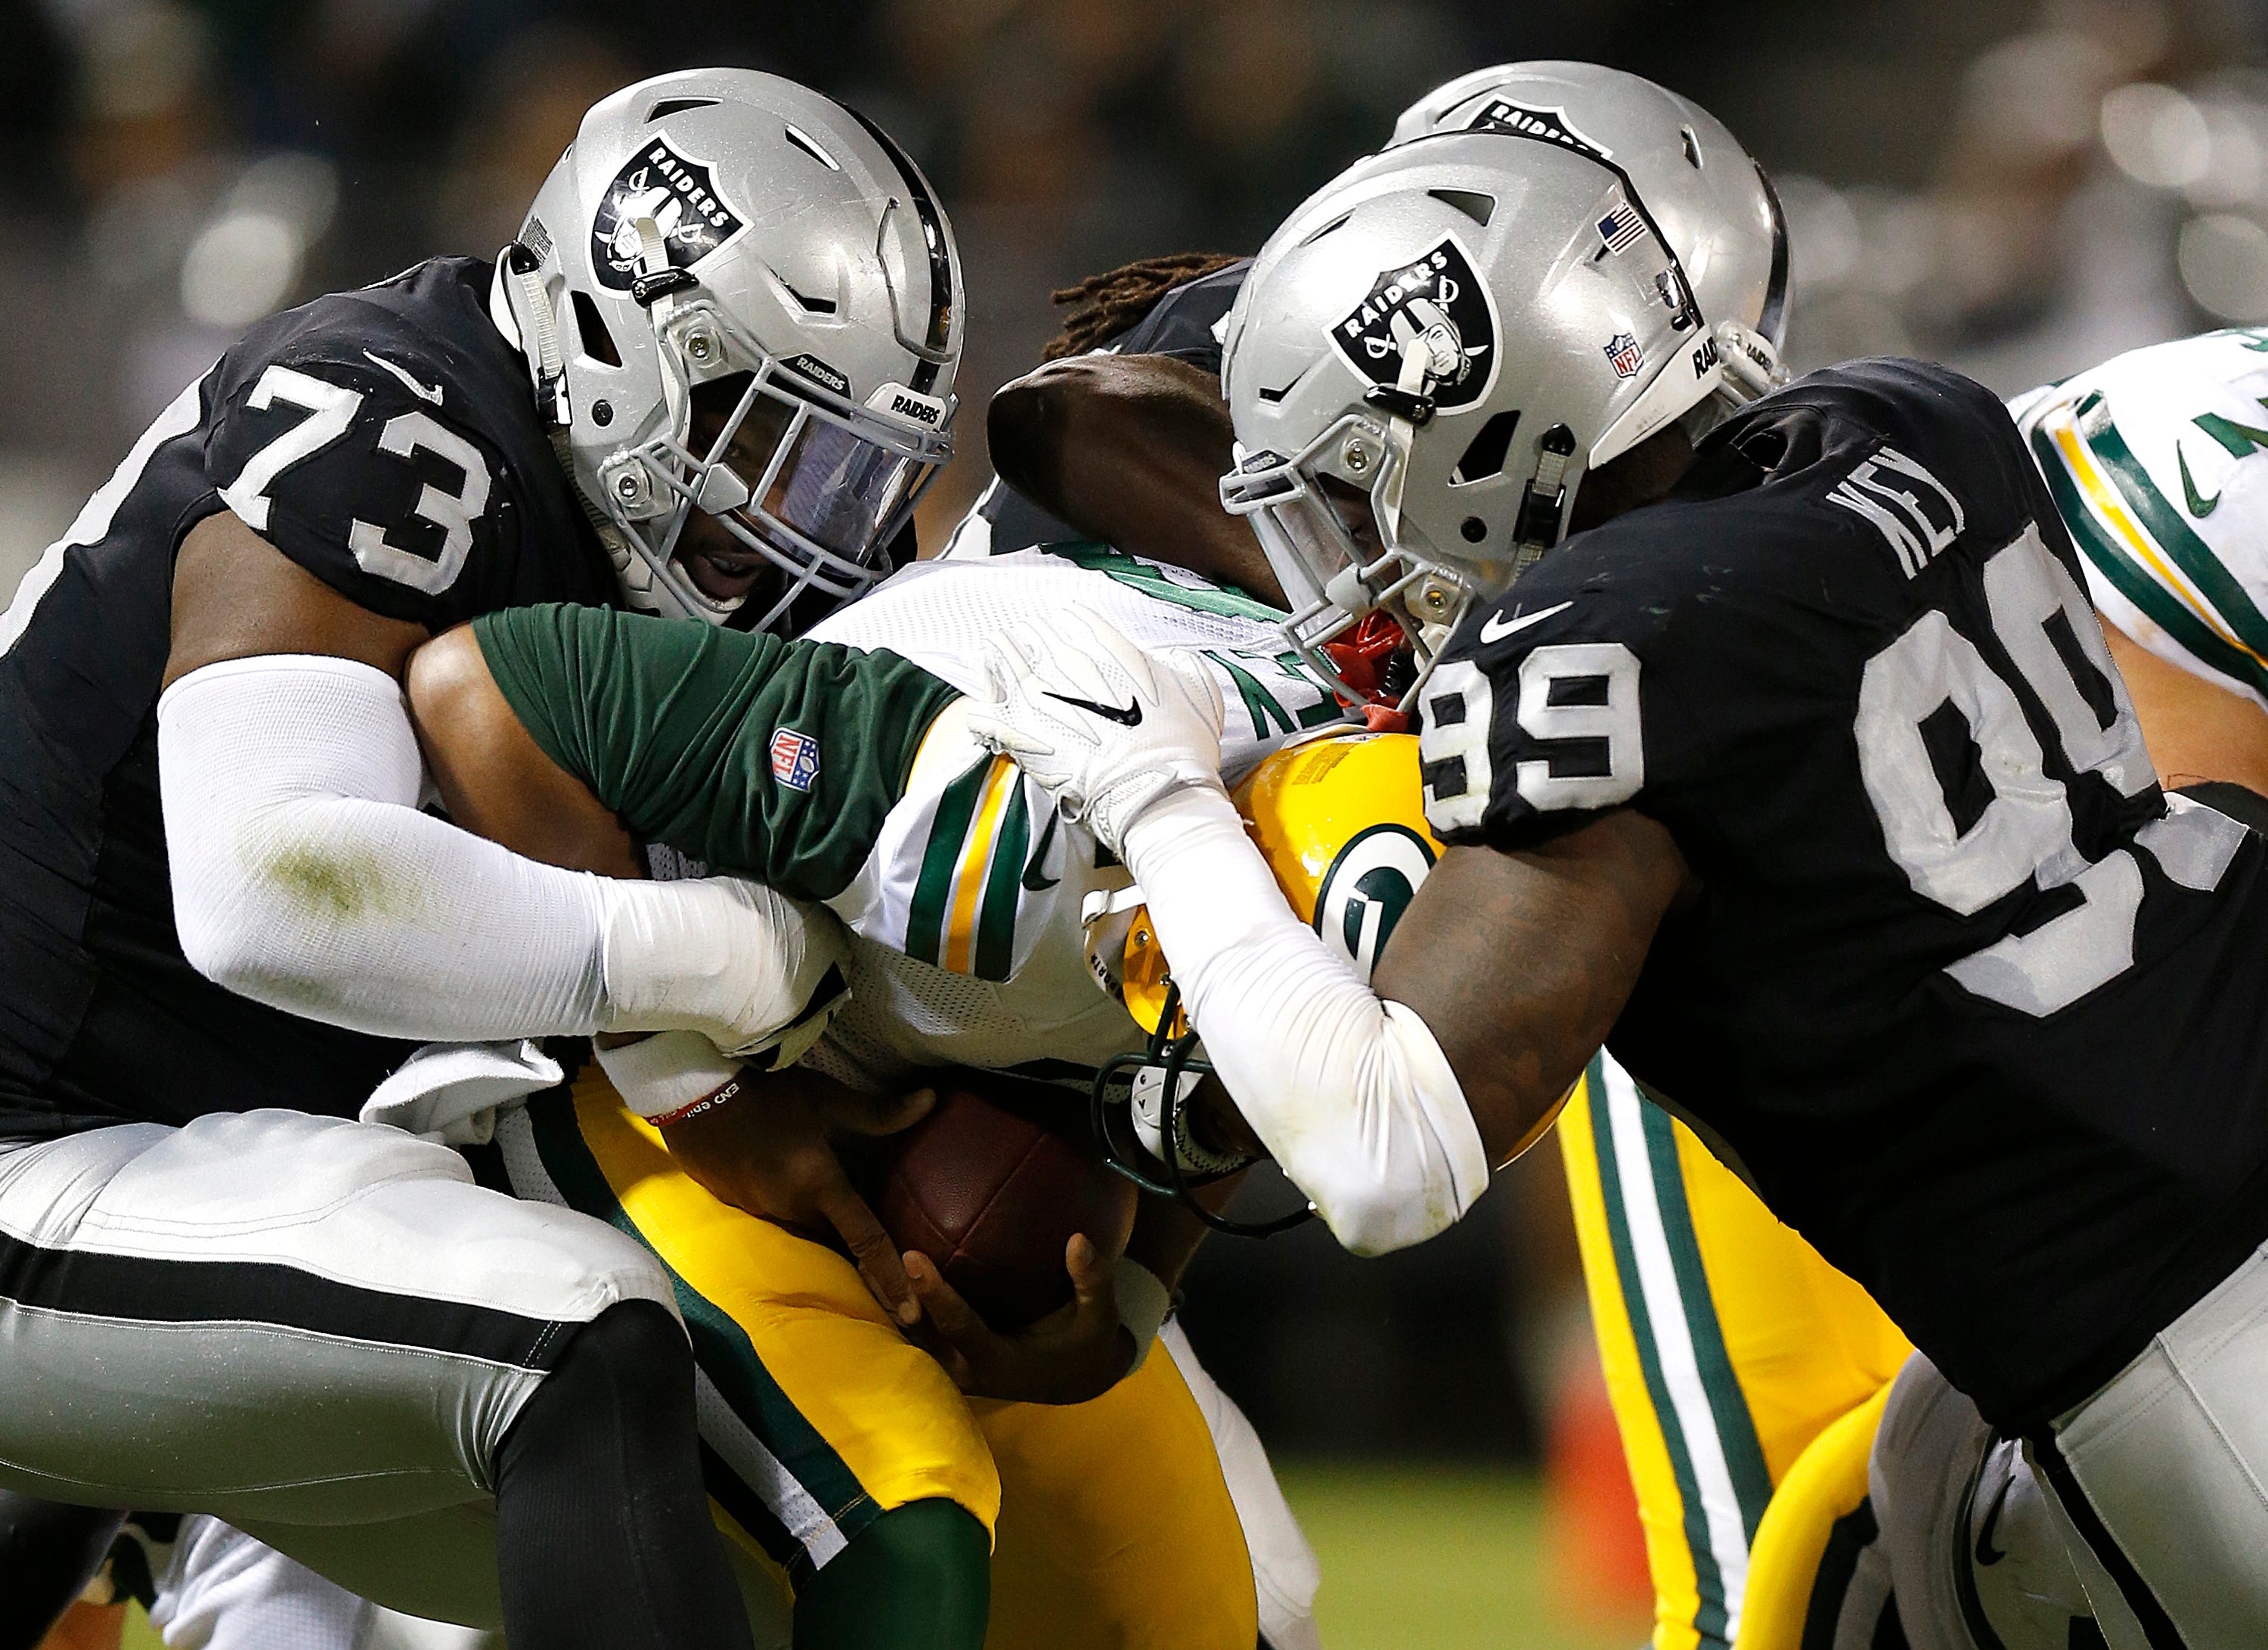 Green Bay Packers quarterback Brett Hundley, center, is sacked by Oakland Raiders defensive tackle Maurice Hurst (73) and defensive end Fadol Brown, obscured, during the first half of an NFL preseason football game in Oakland, Calif., Friday, Aug. 24, 2018. At right is Raiders defensive end Arden Key (99).